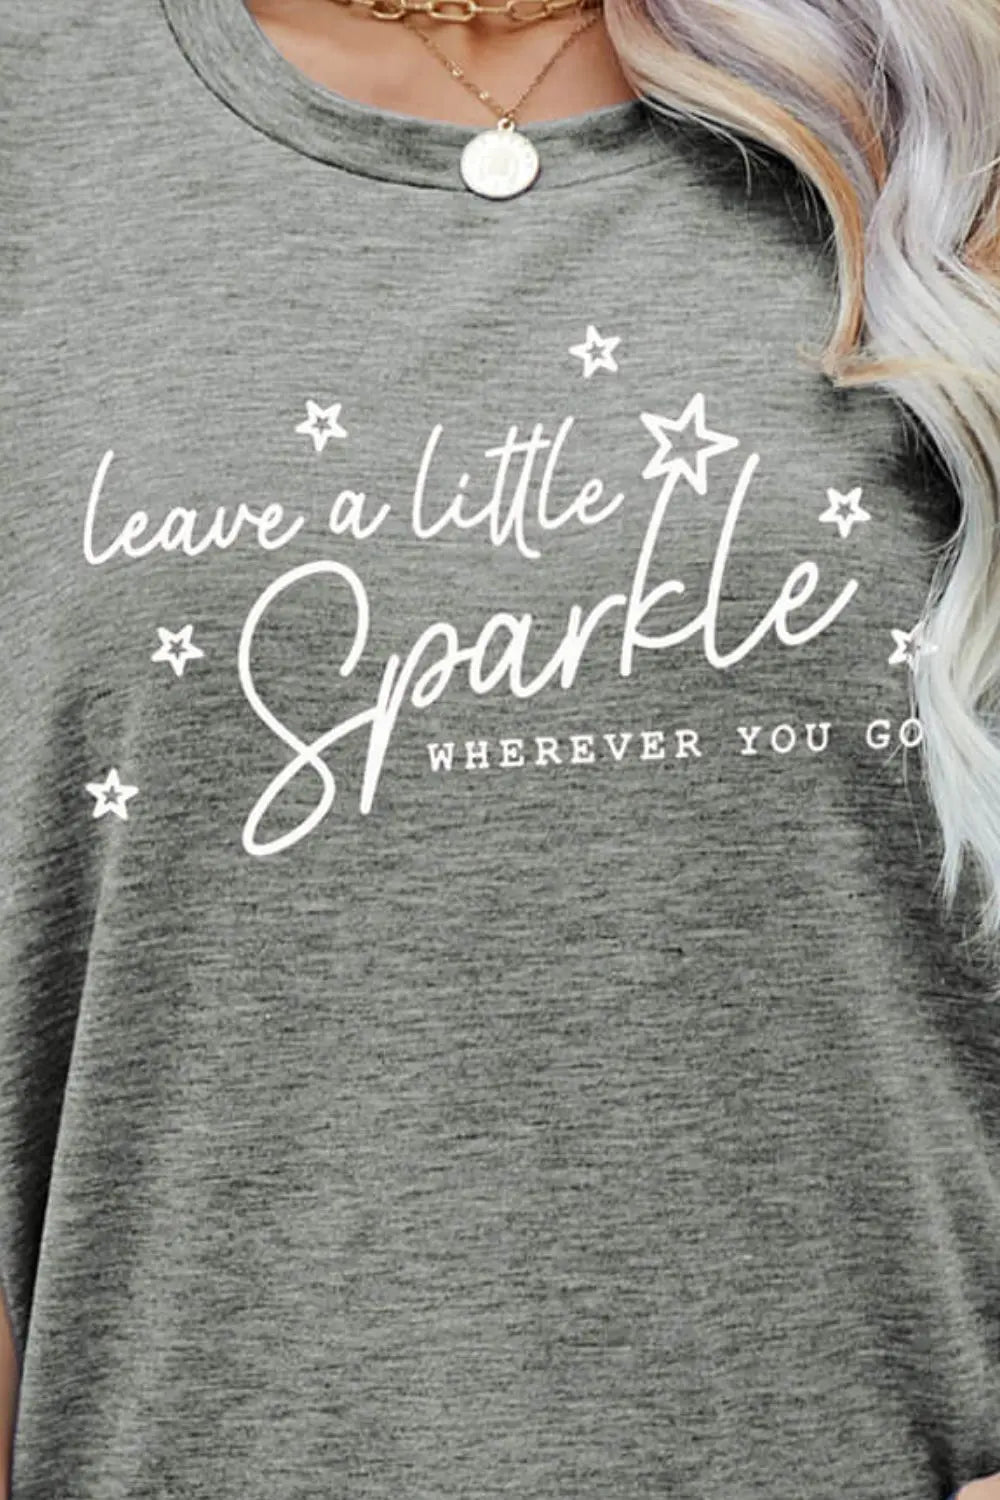 LEAVE A LITTLE SPARKLE WHEREVER YOU GO Tee Shirt - Image #3